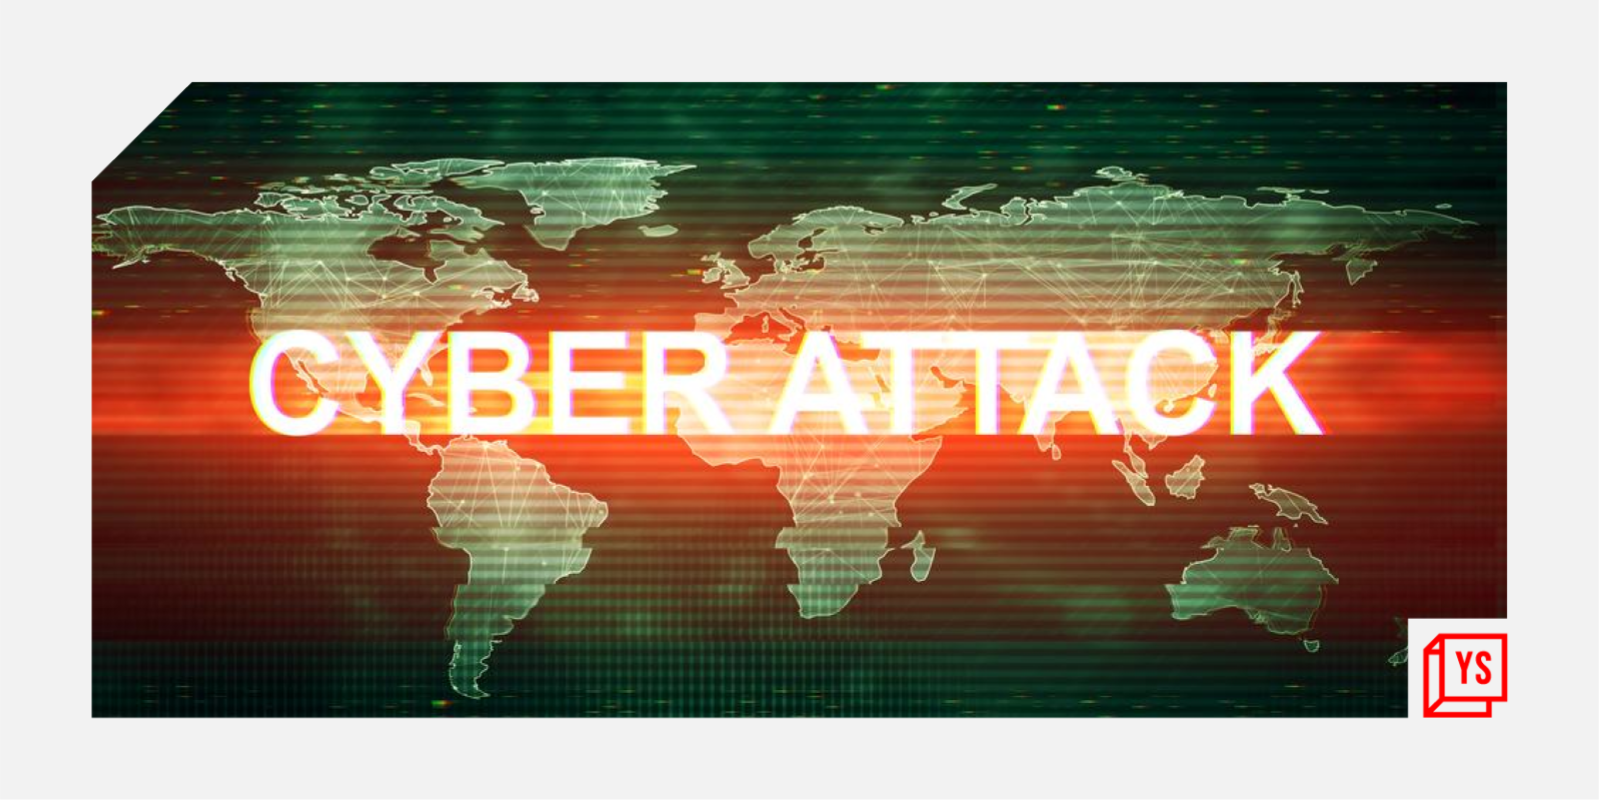 Why the world is seeing a sudden surge in cyberattacks

